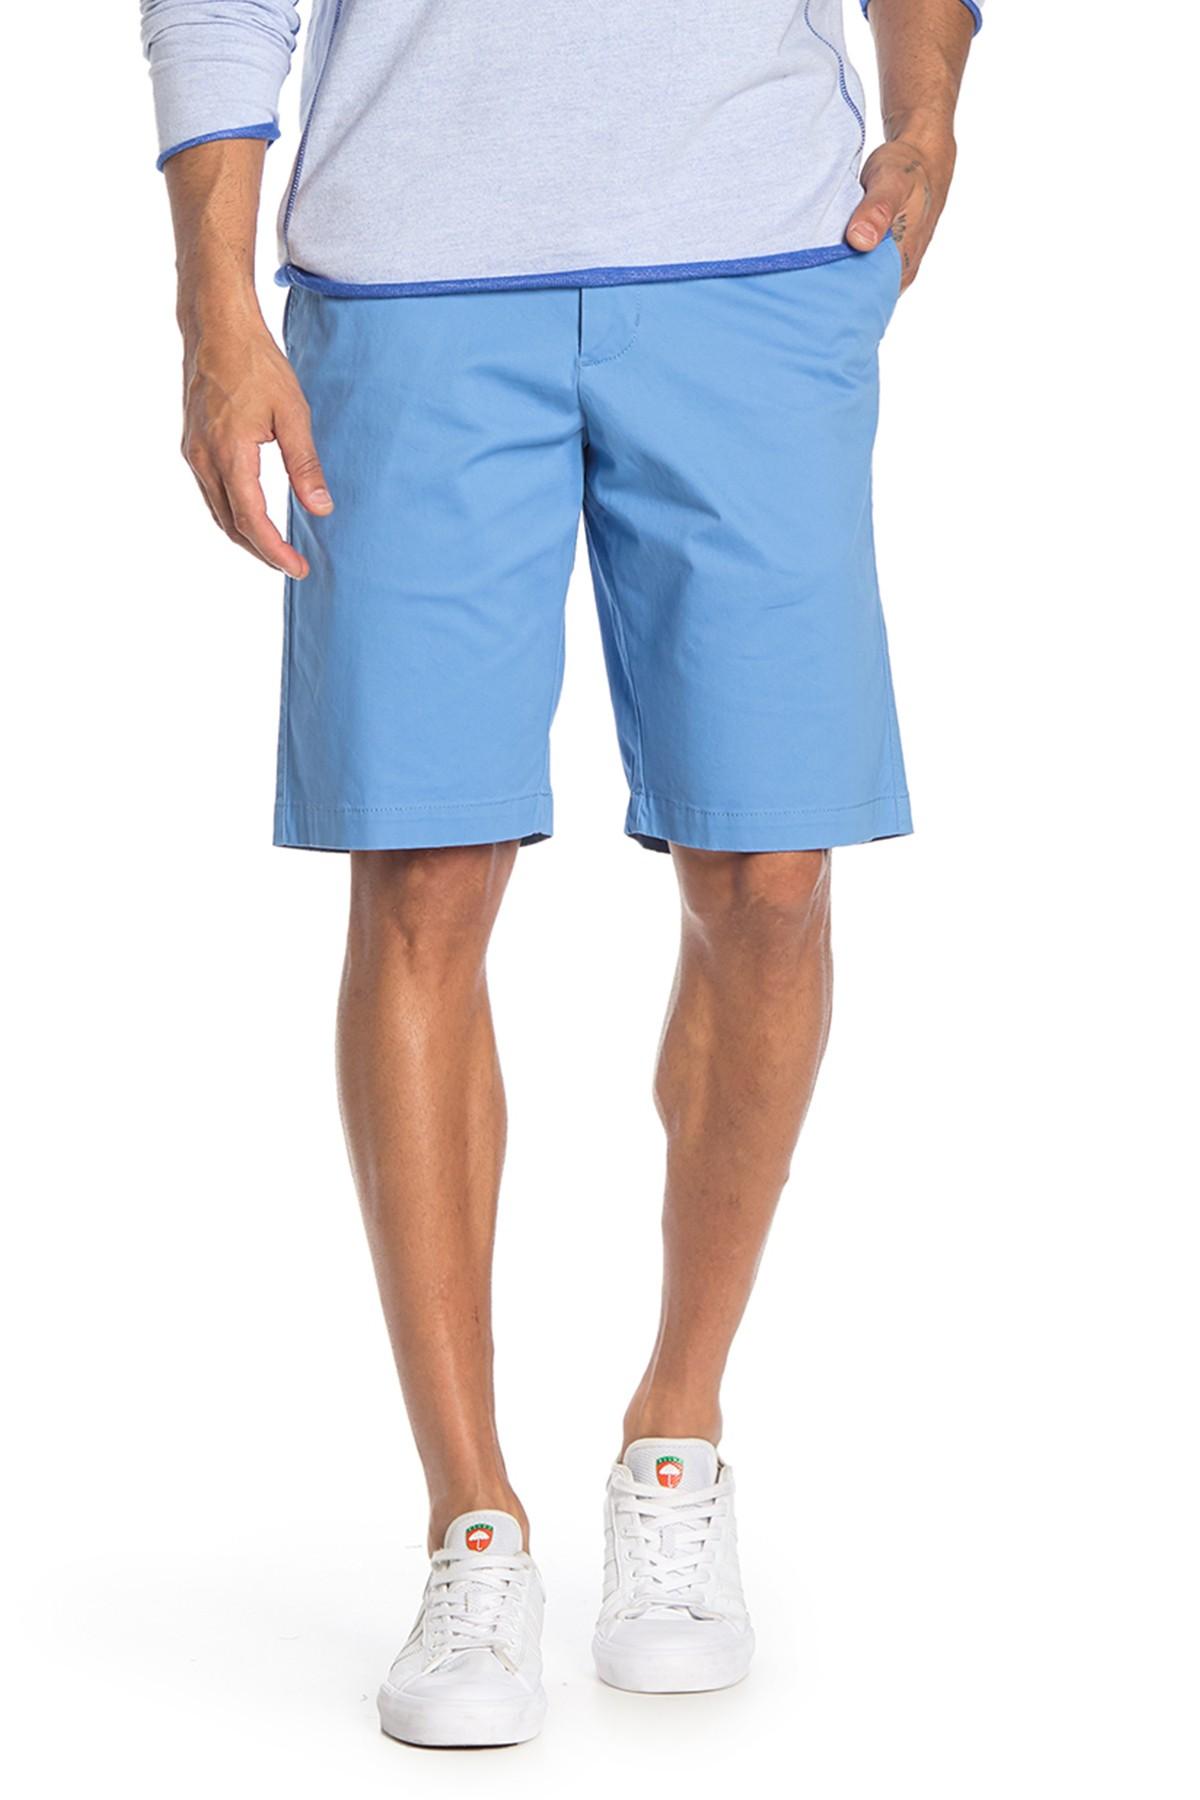 Tommy Bahama Cotton Top Sail Shorts in 